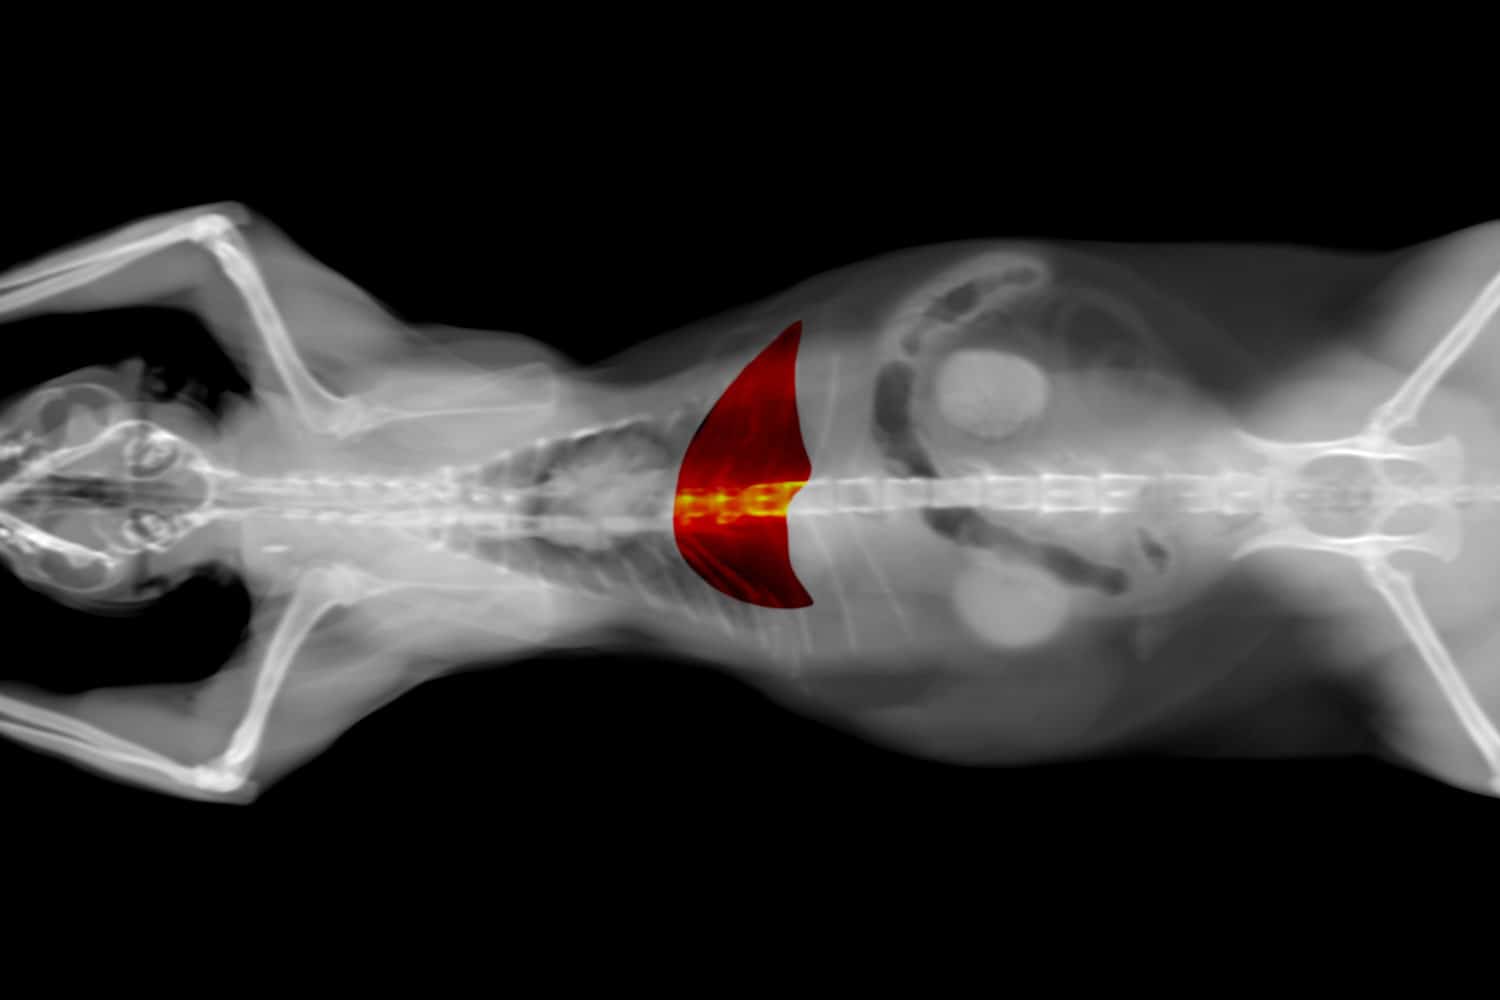 black and white CT scan of a cat pet on a black background. Oncology veterinary diagnostic x-ray test. liver highlighted in red.
